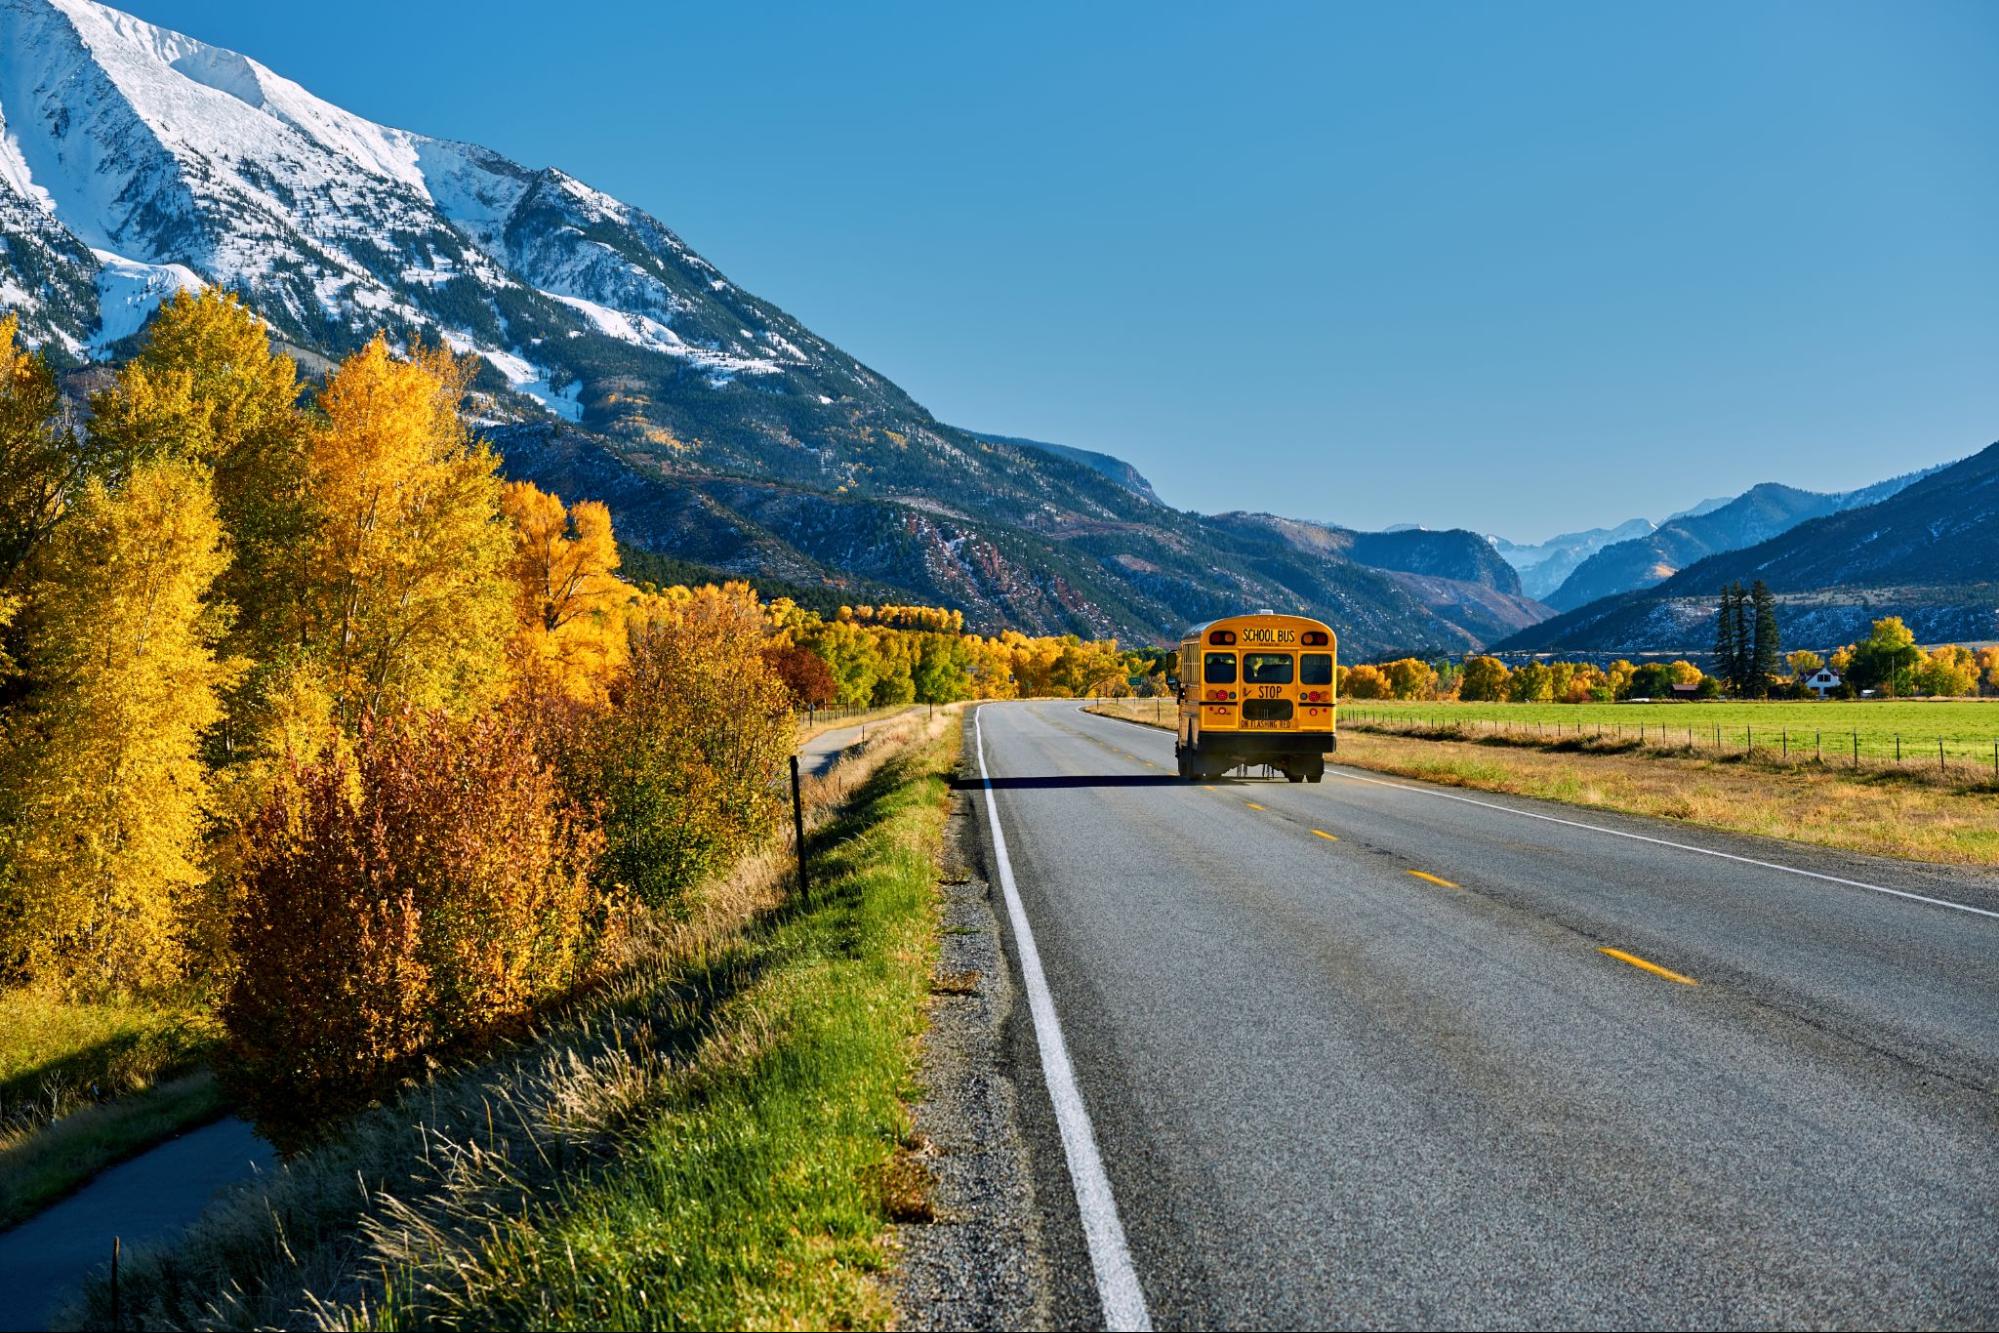 Ensure you have the right transportation for your educational group travel